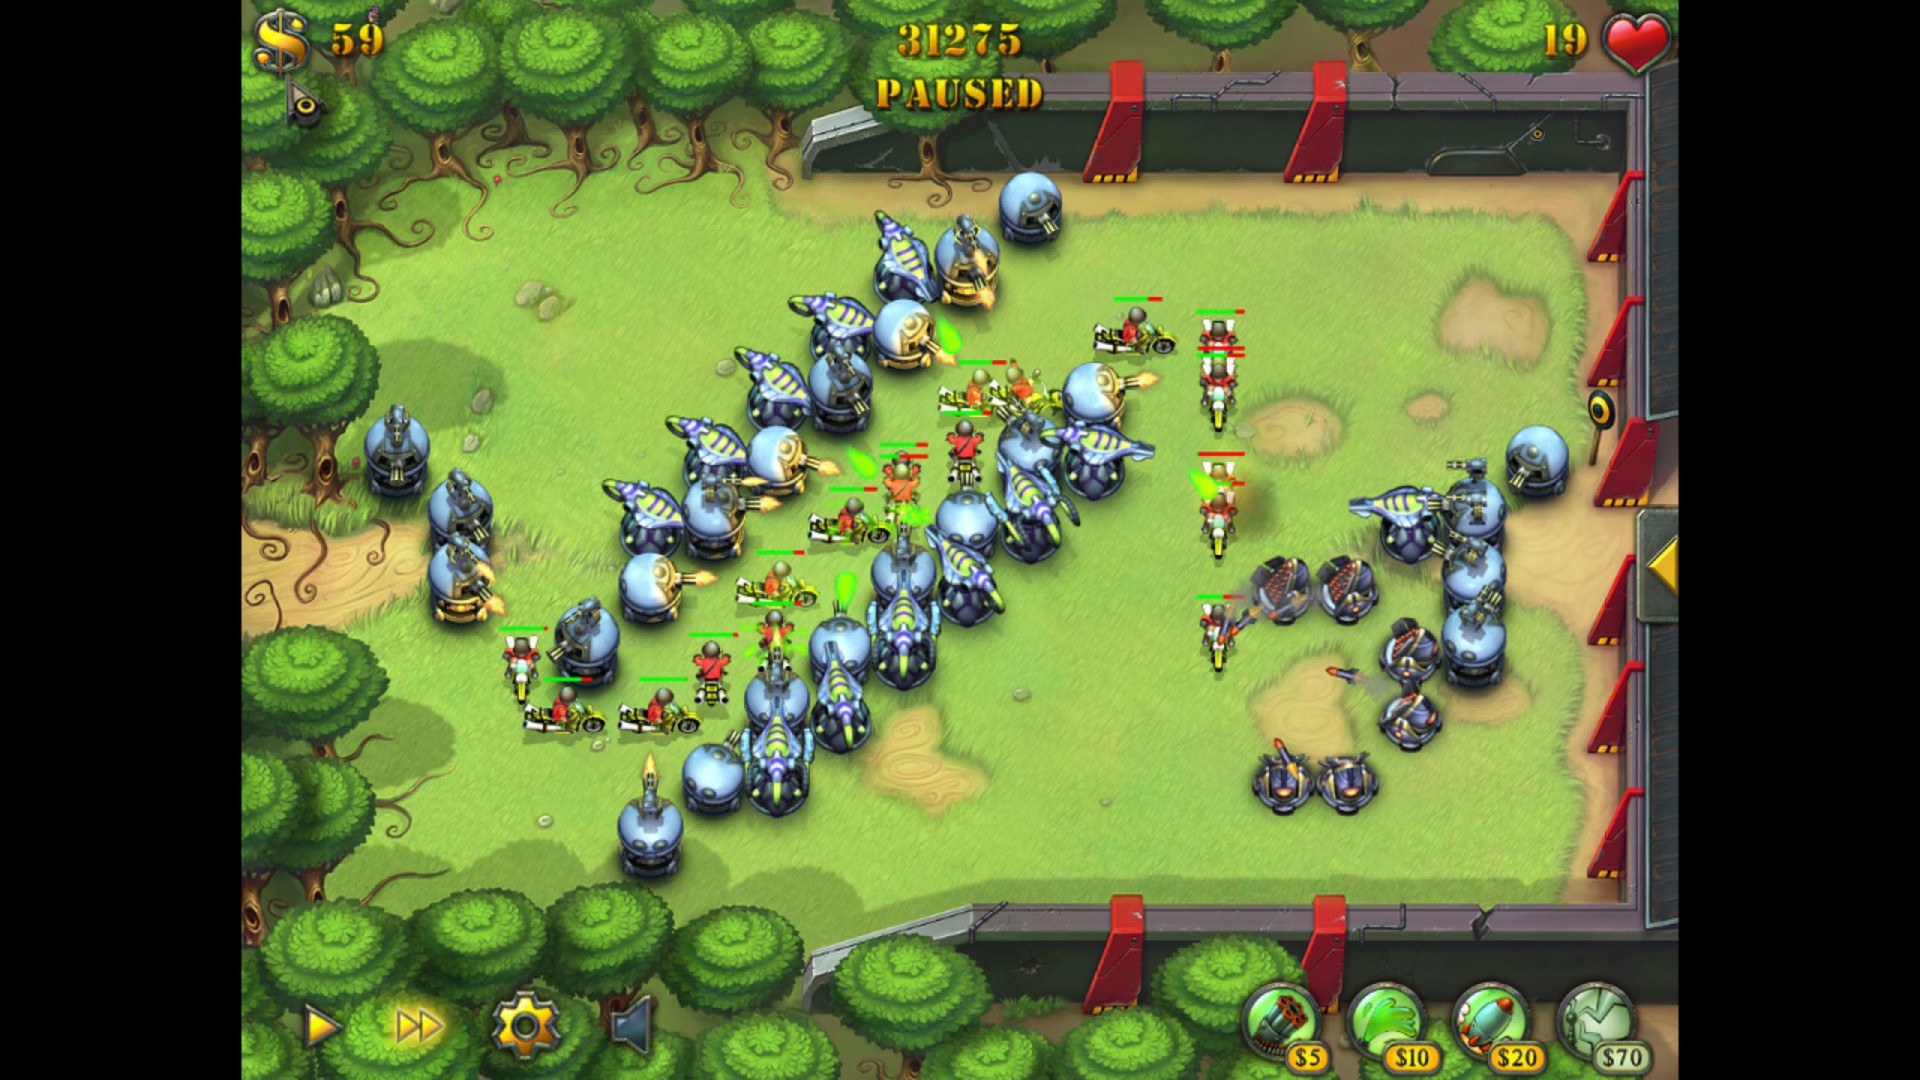 fieldrunners 2 pc download full